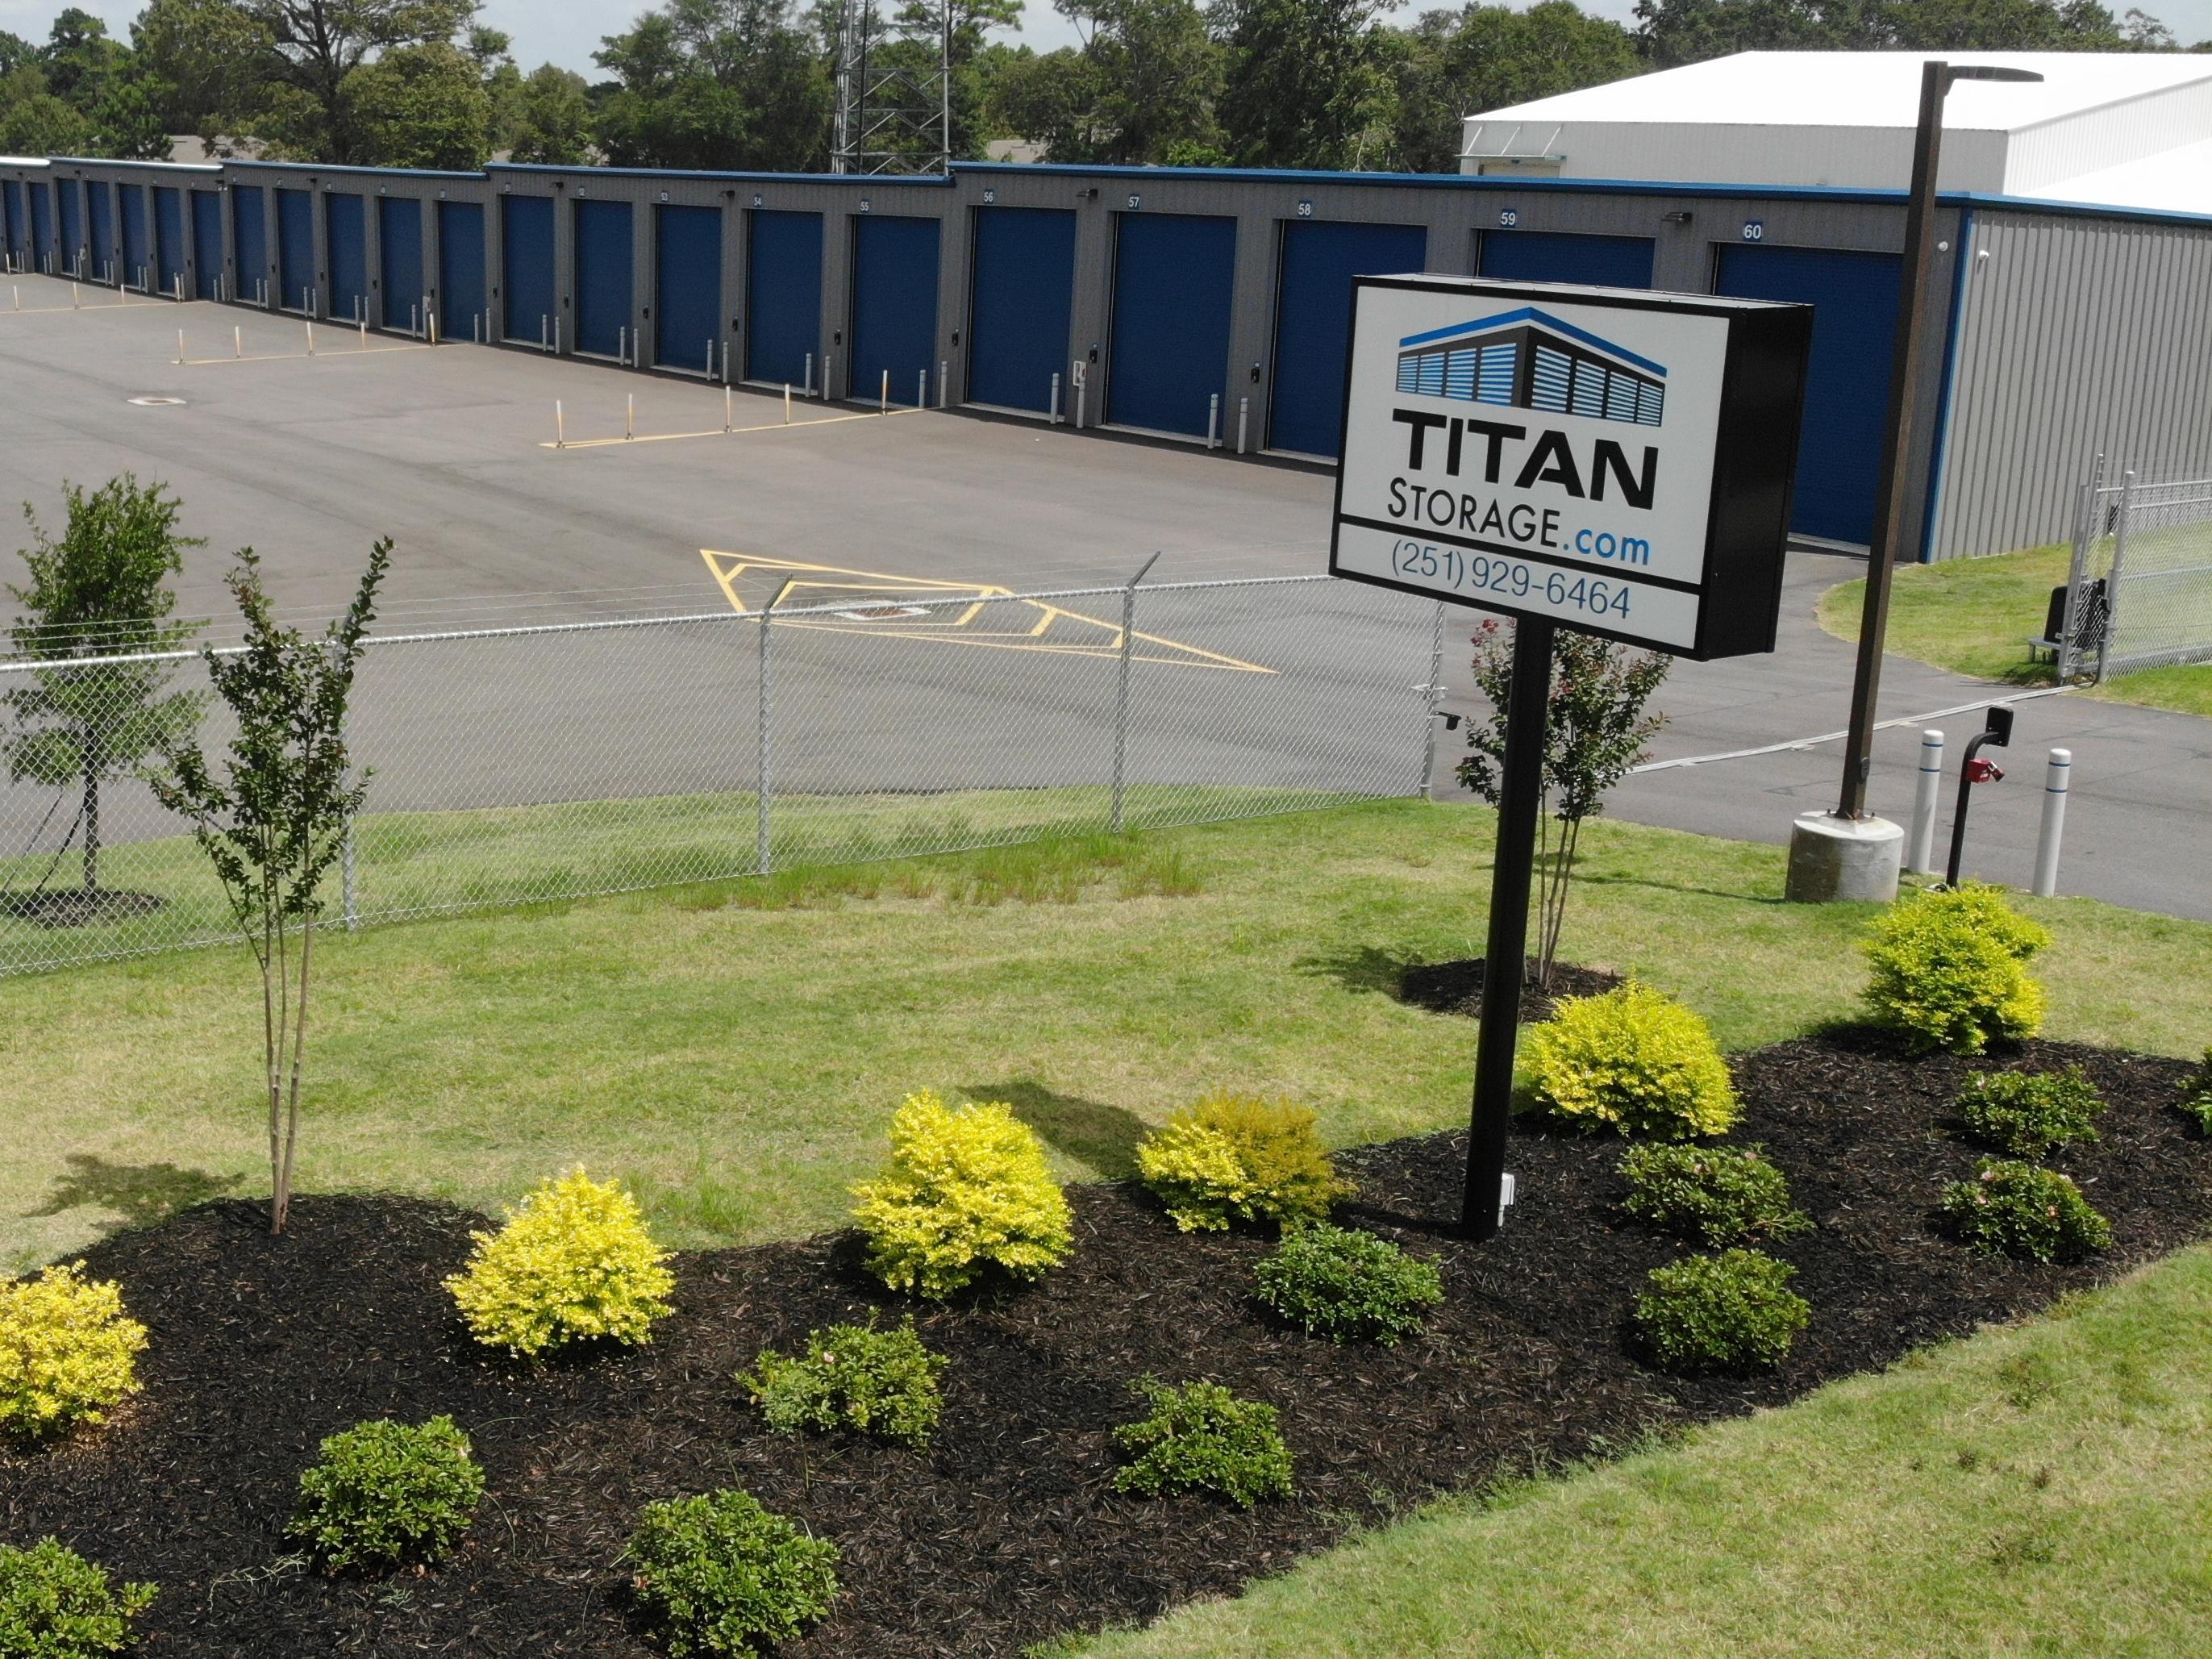 GET IN TOUCH WITH TITAN STORAGE FOR YOUR Mobile, AL CLASSIC CAR STORAGE UNIT SOLUTION